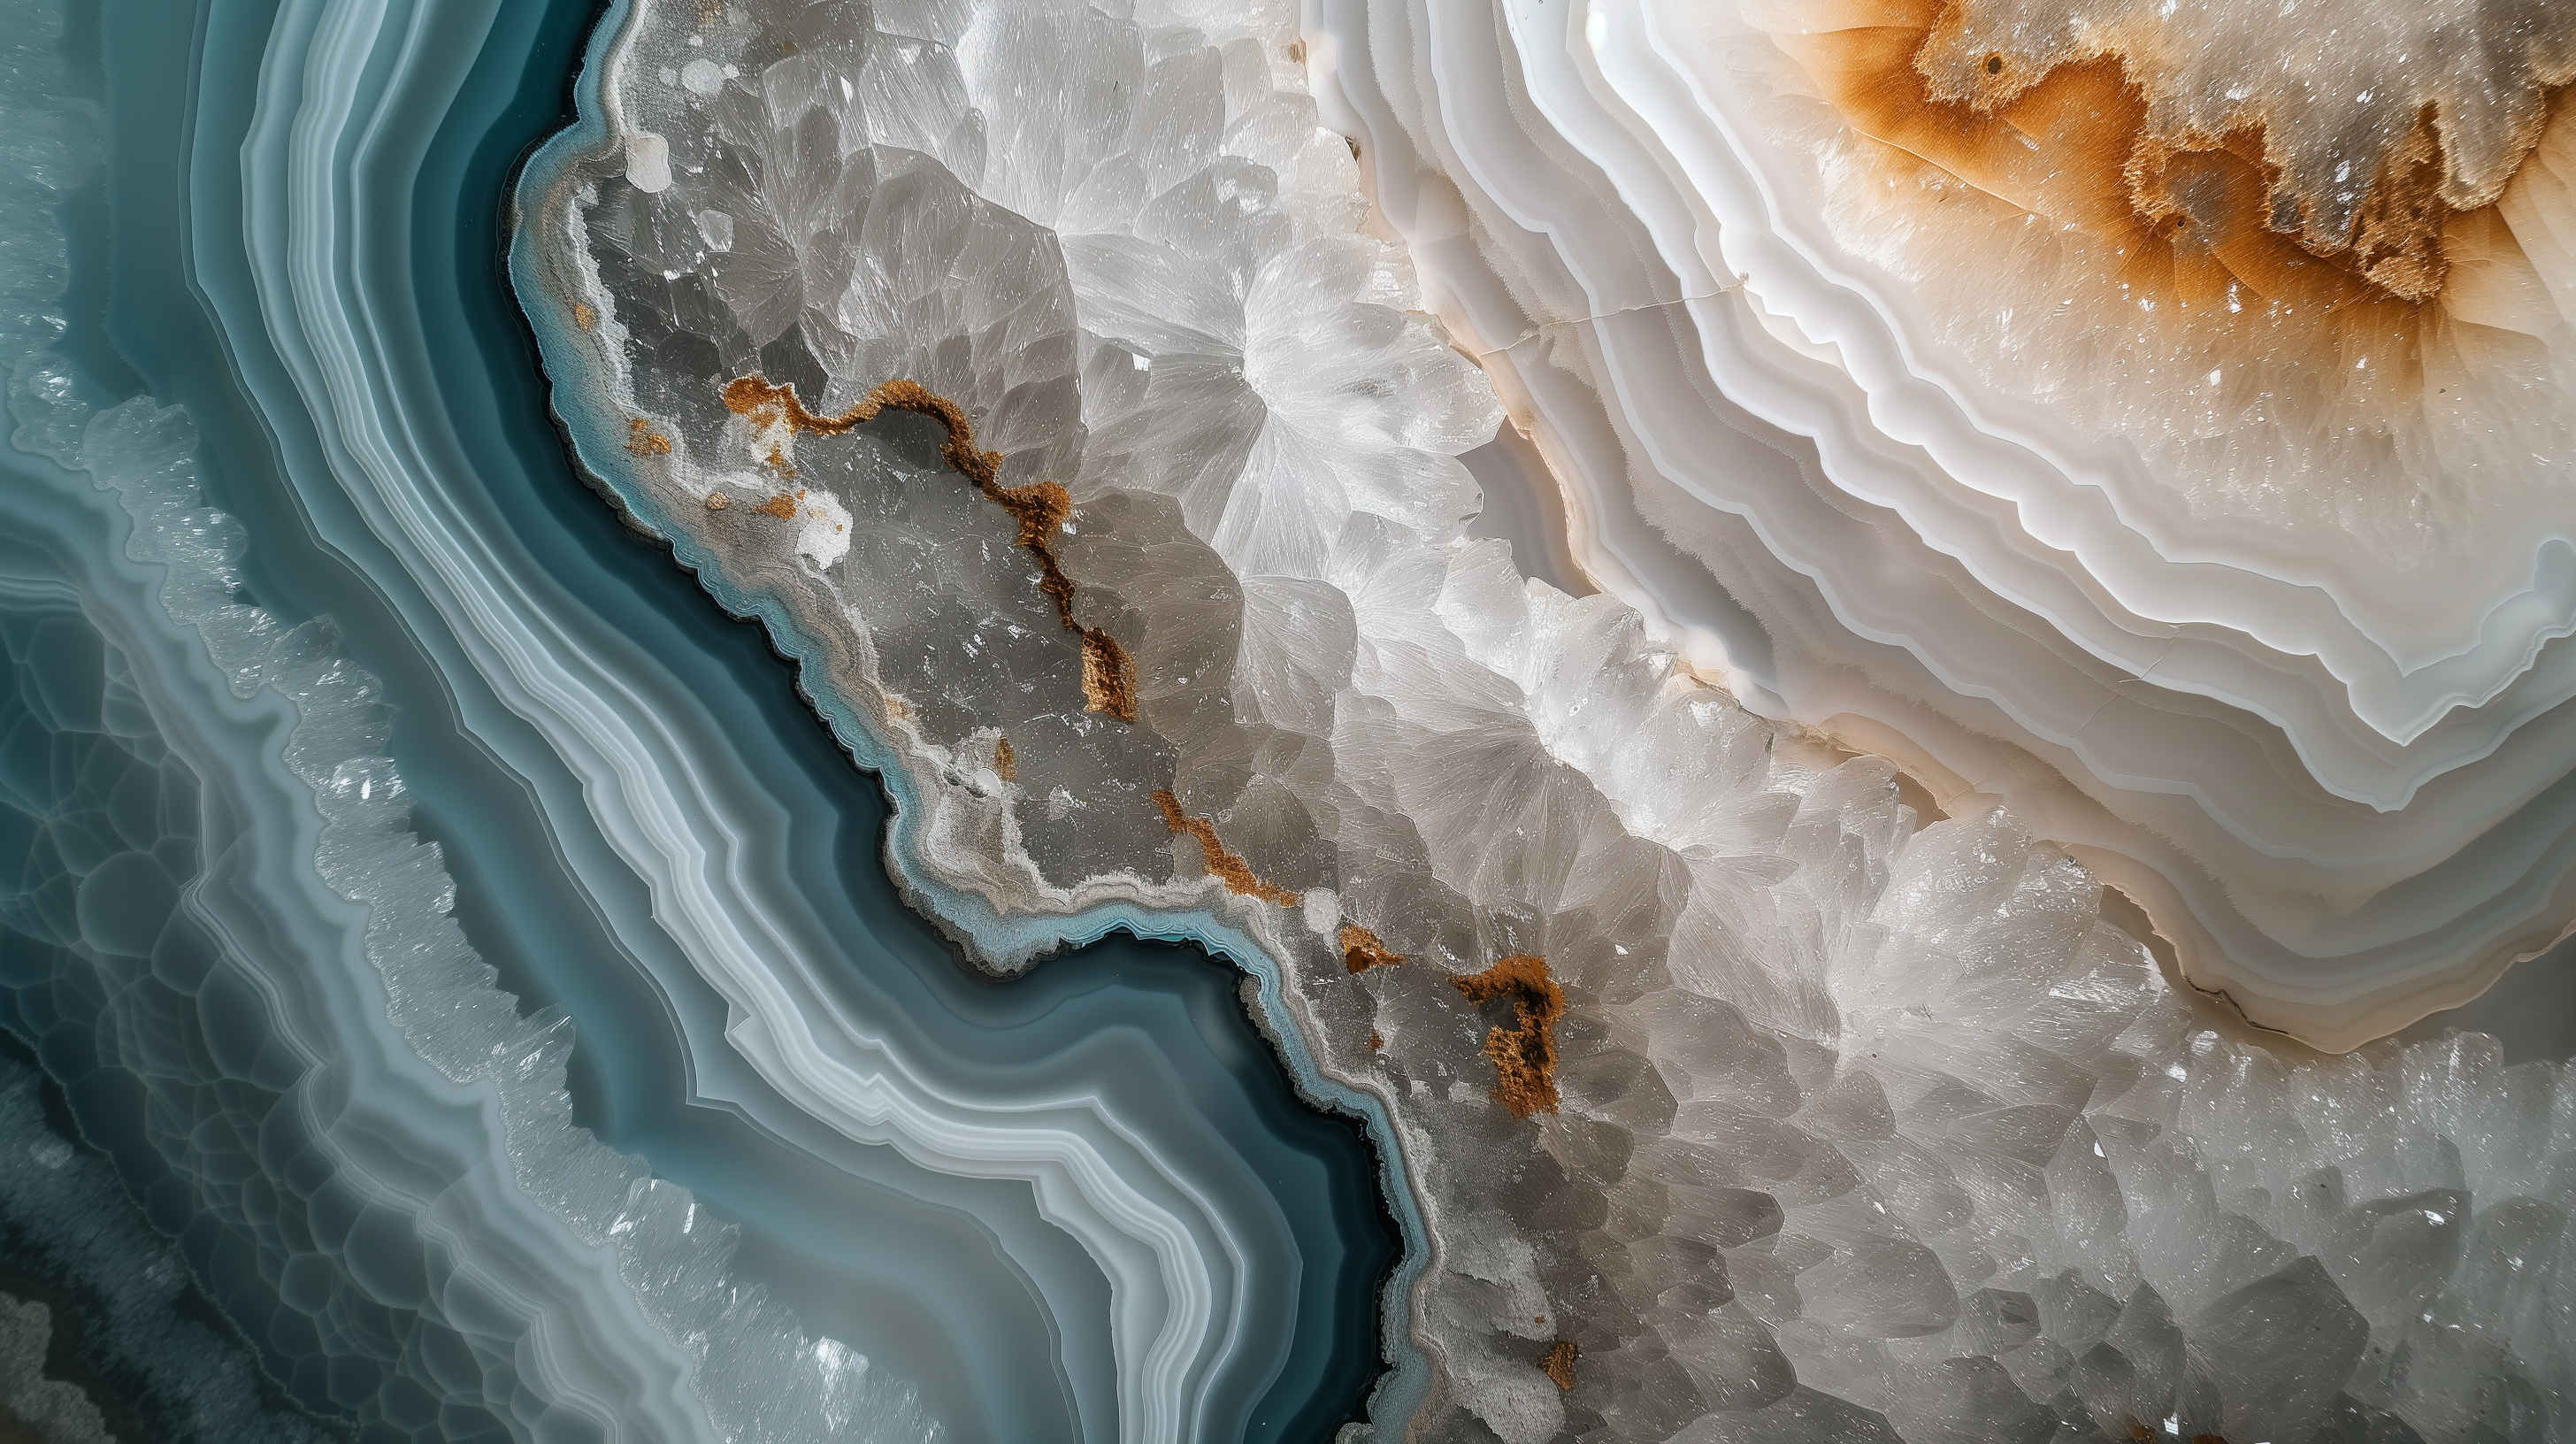 High-definition desktop wallpaper featuring a close-up view of a beautifully layered geode with mesmerizing blue and white crystal patterns.